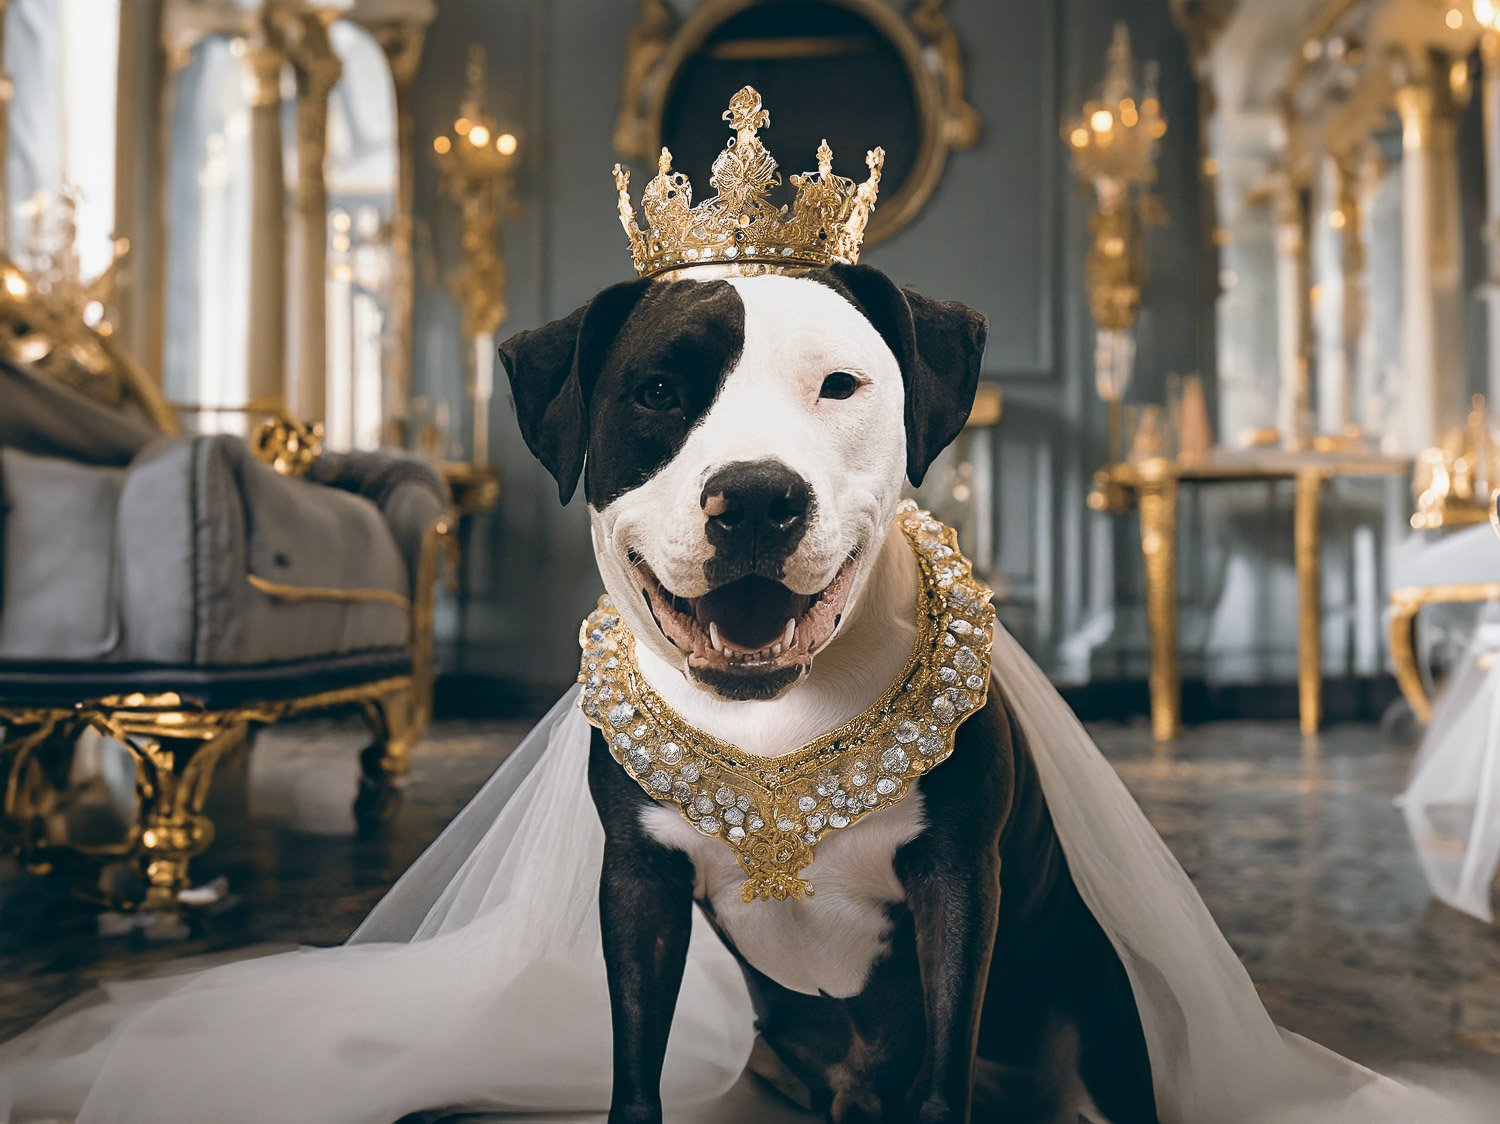 A black and white staffie dog sitting in her royal chambers wearing a crown and gown 